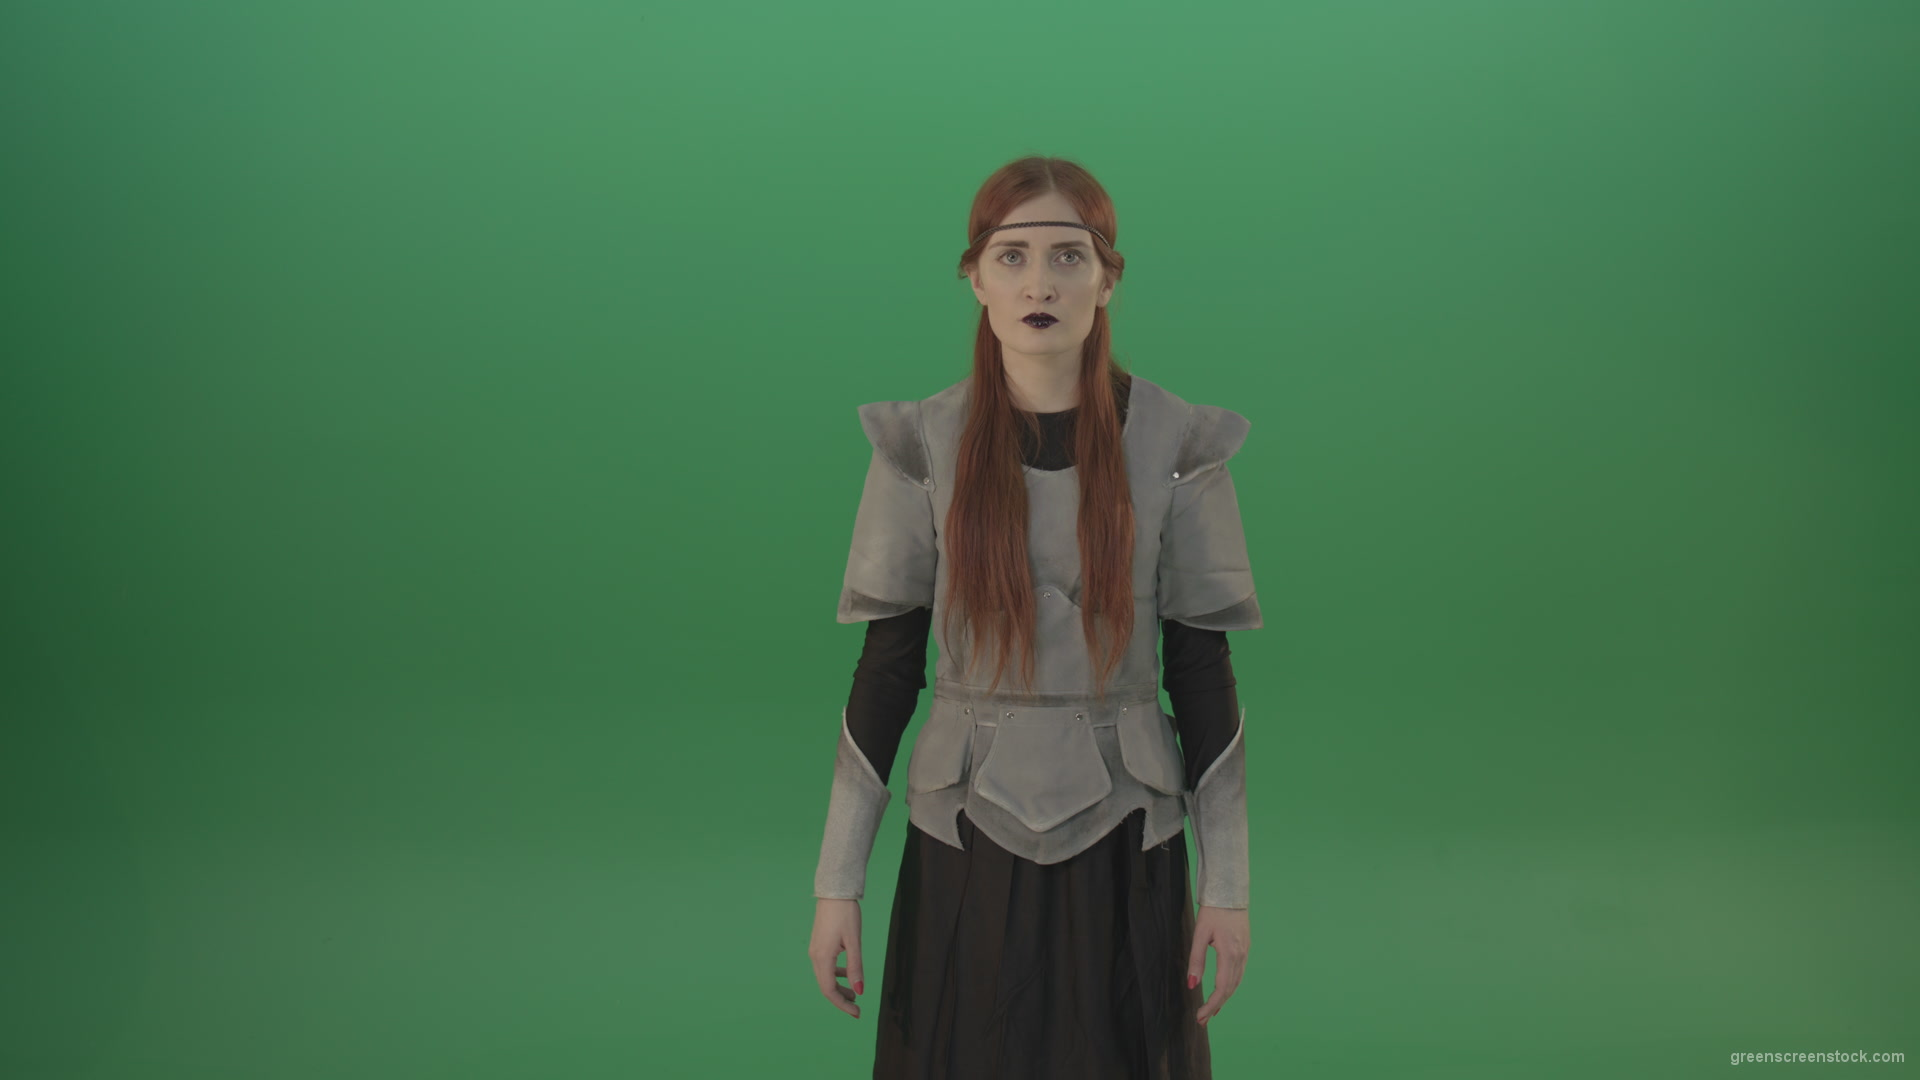 Cried-warrior-girl-releases-all-her-energy-cosplay-on-a-green-background_002 Green Screen Stock